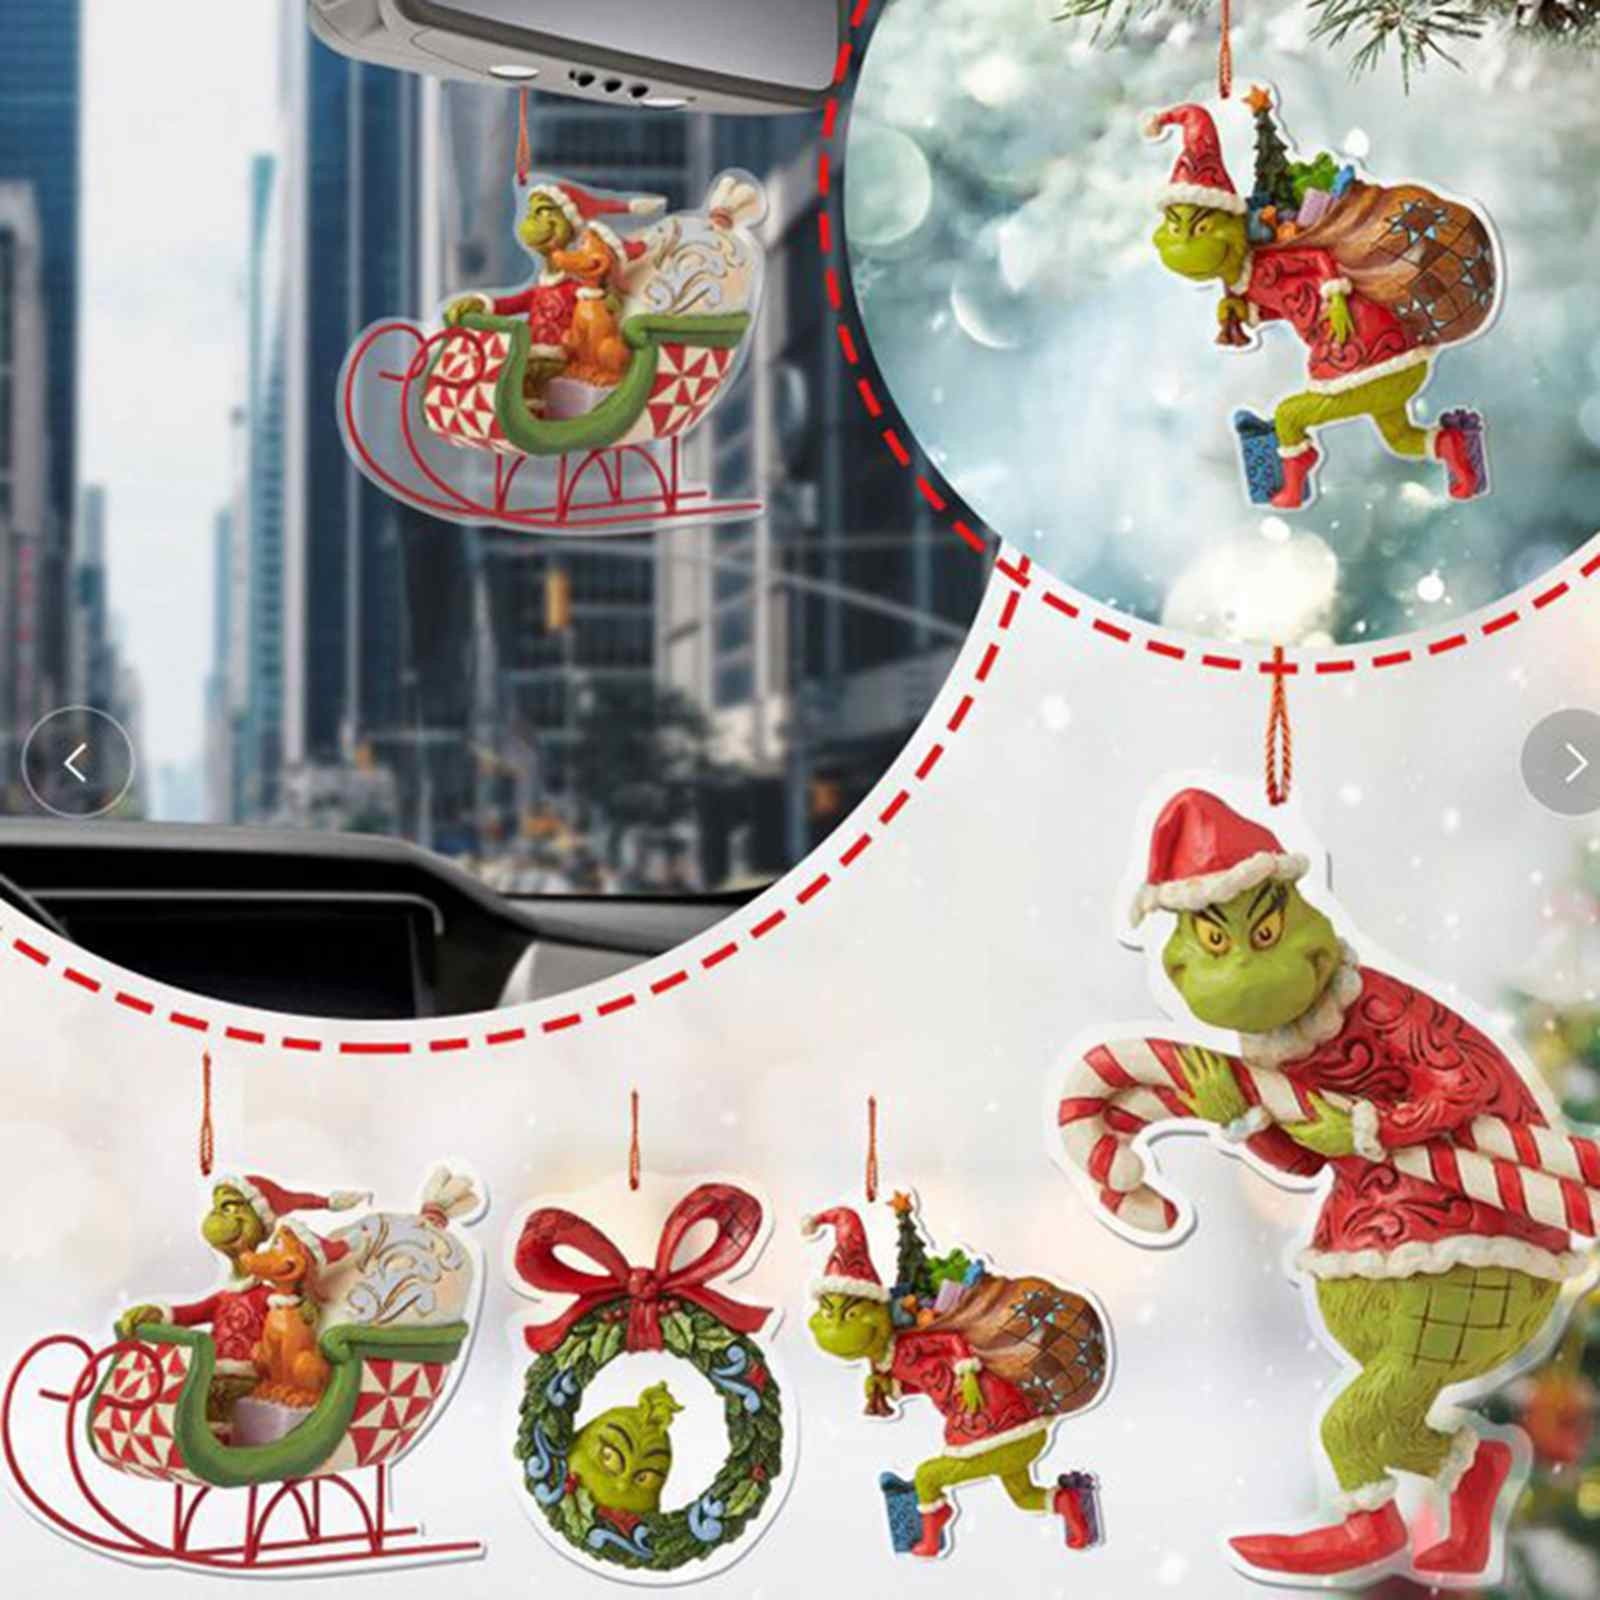 Grinch Christmas Ornaments Tree Decorations Wood Accessories Christmas Xmas  X@